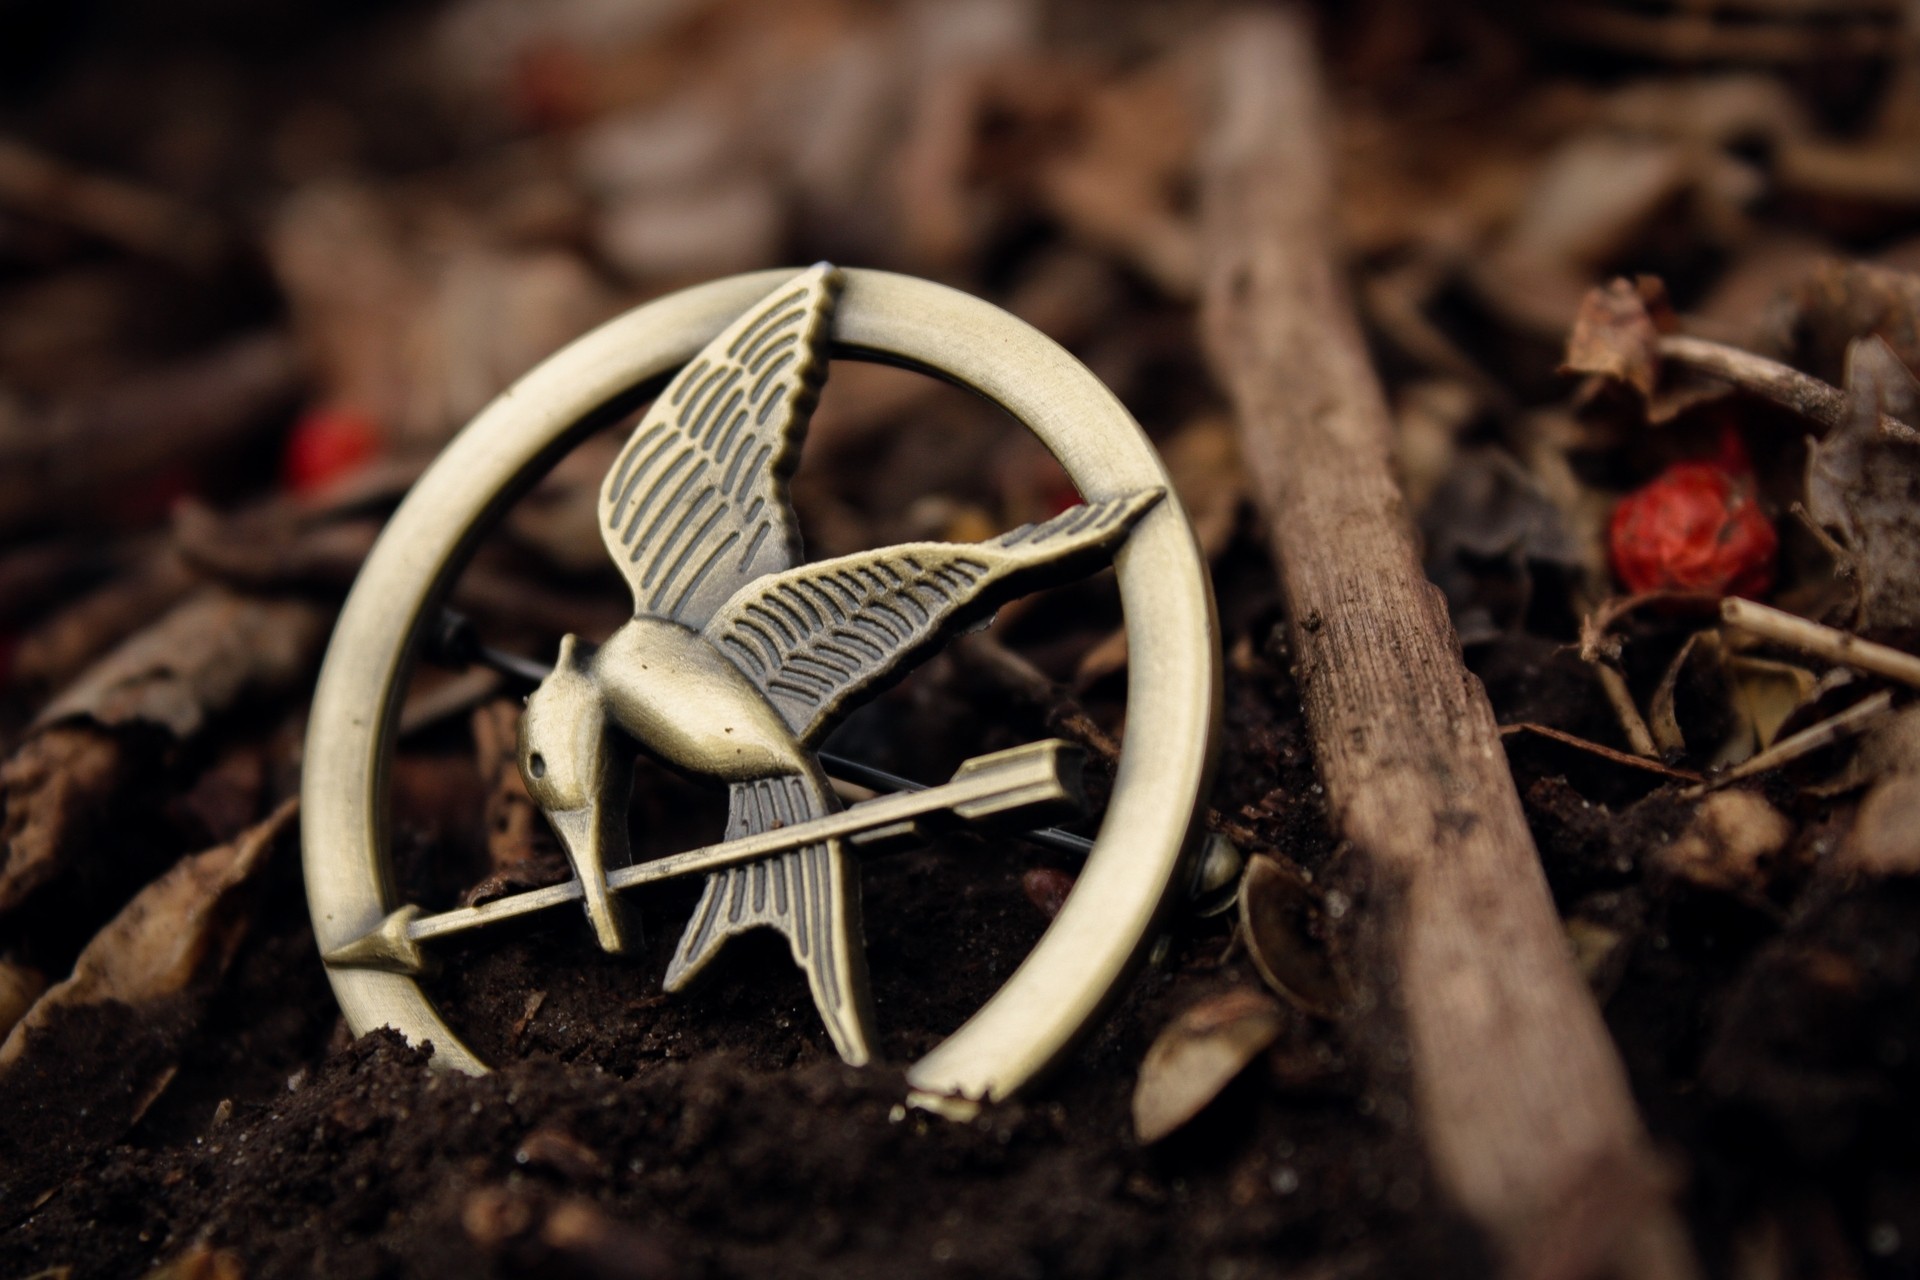 General 1920x1280 The Hunger Games ground closeup pins movies